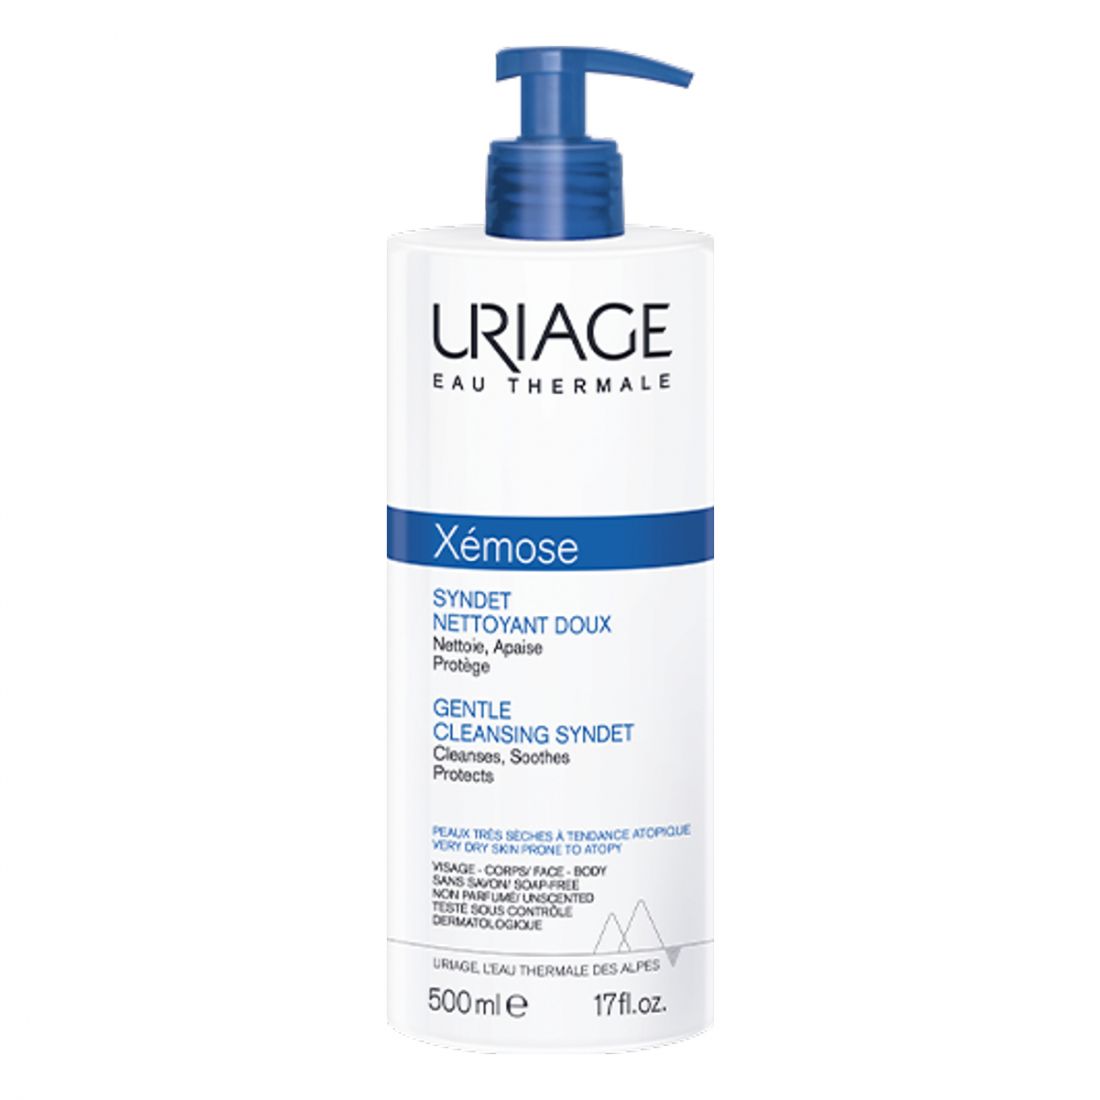 Uriage - Gel nettoyant doux 'Xémose Syndet' - 500 ml